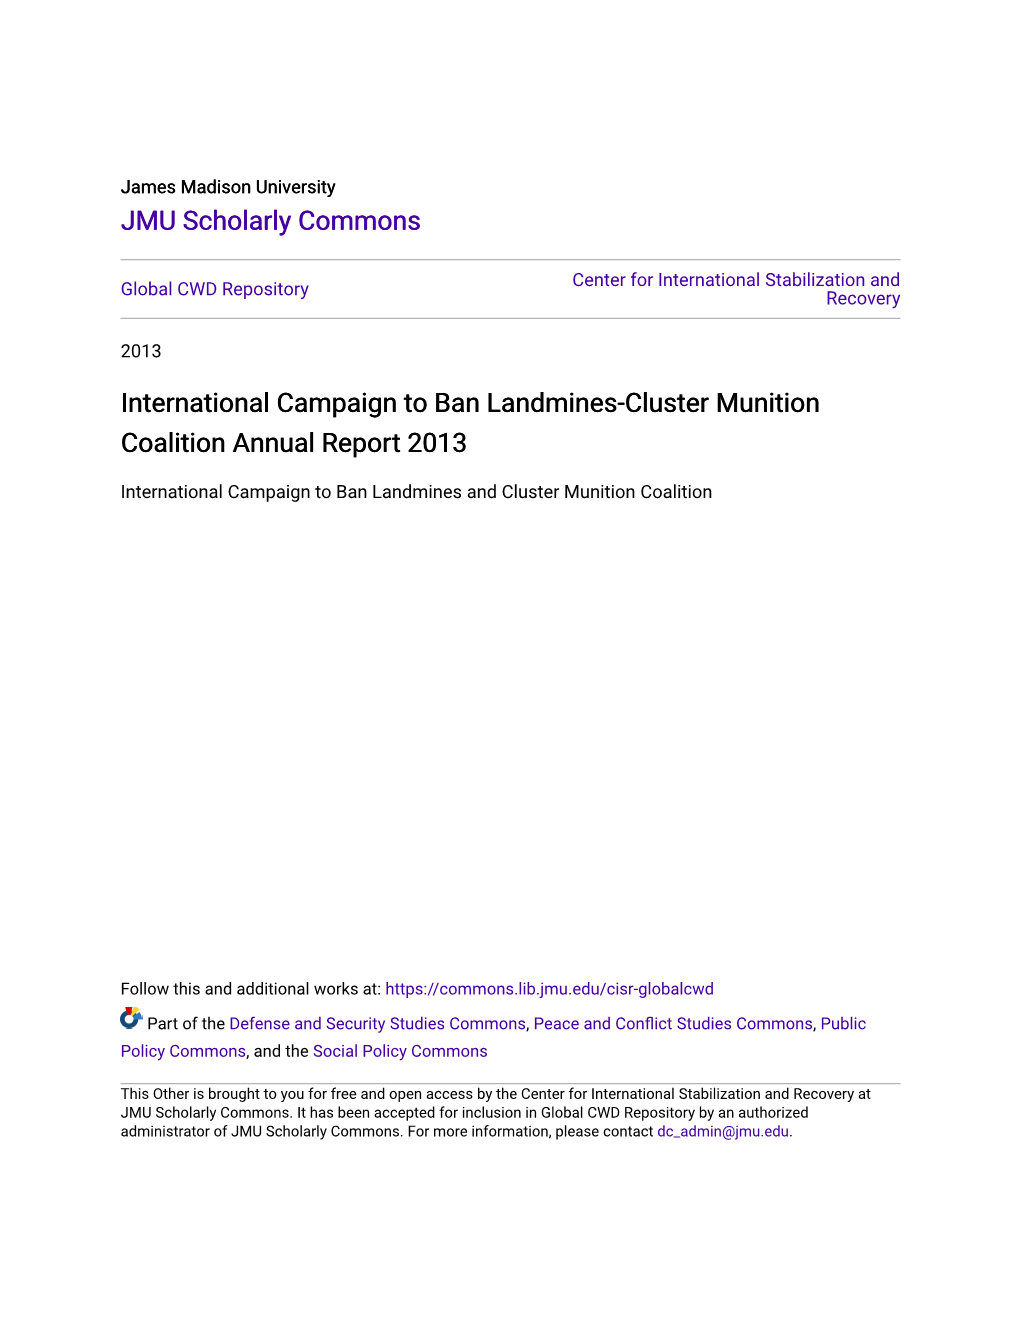 International Campaign to Ban Landmines-Cluster Munition Coalition Annual Report 2013